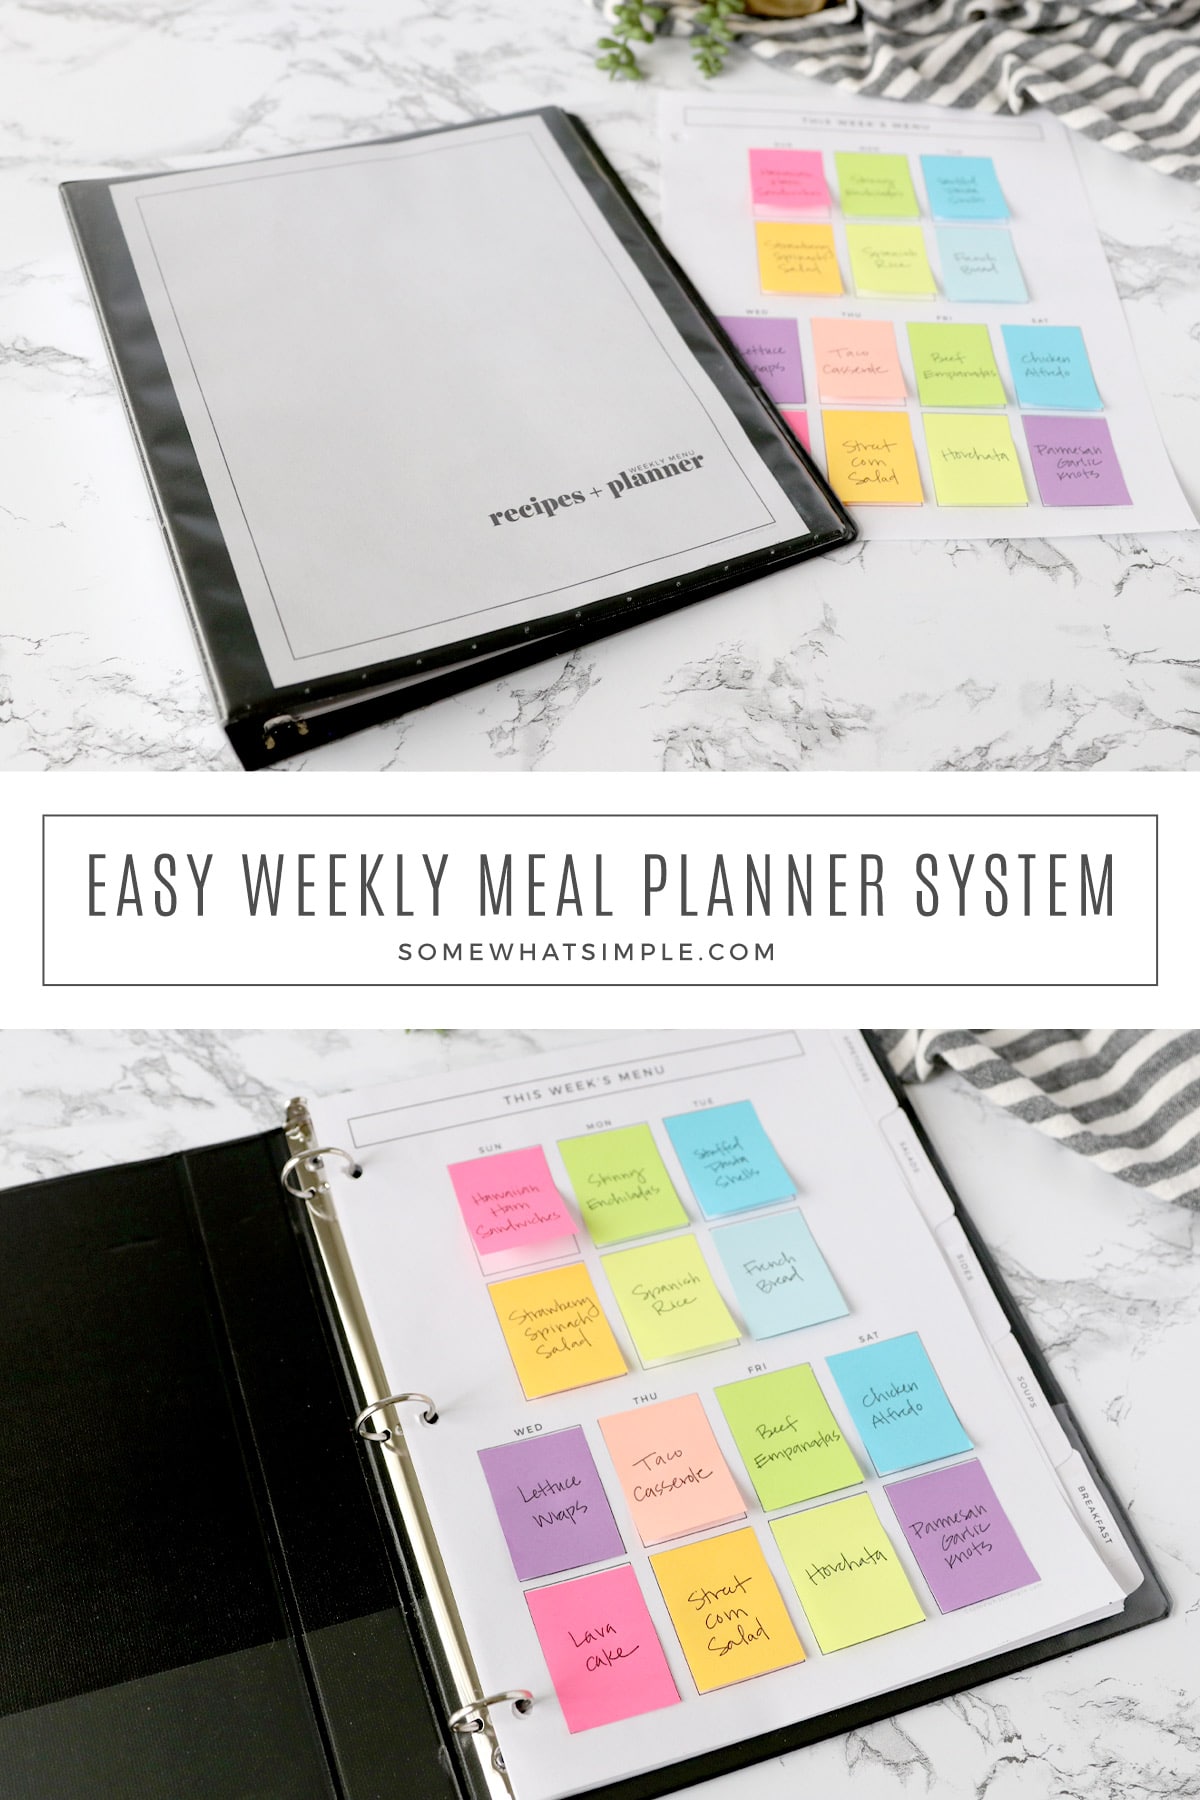 Transform meal planning from tedious to fabulous with a quick and easy meal plan notebook. via @somewhatsimple